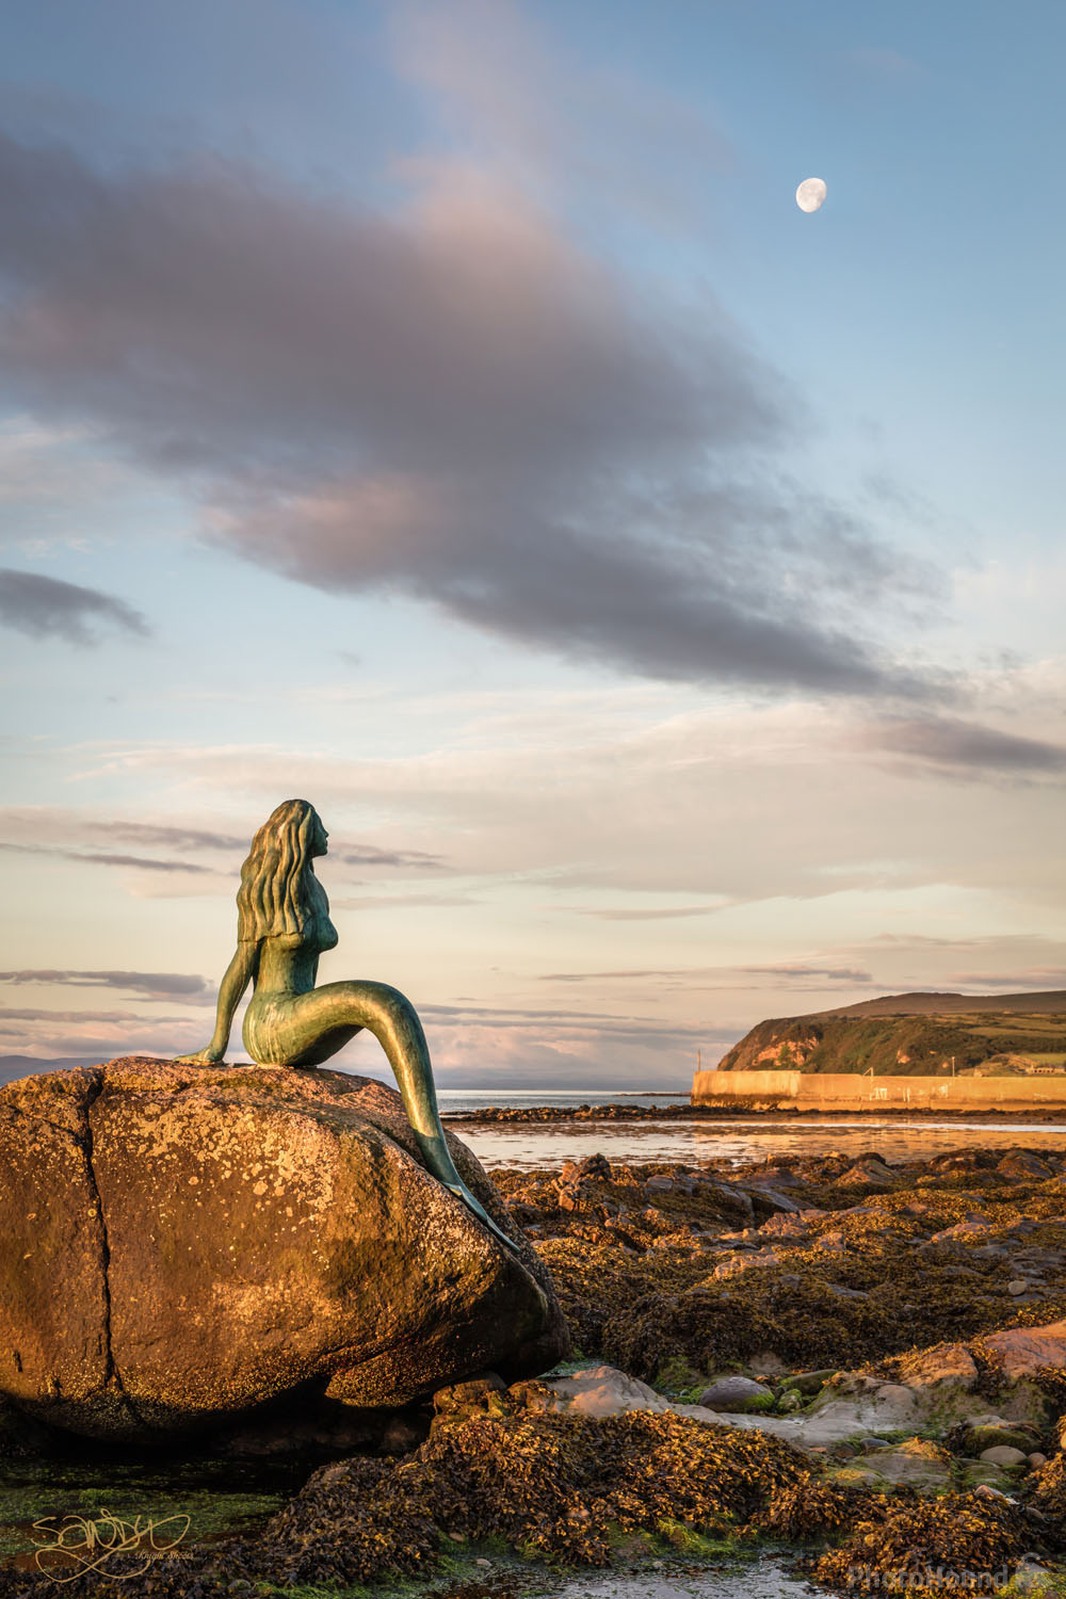 Image of Mermaid of the North, Balintore by Sandy Knight